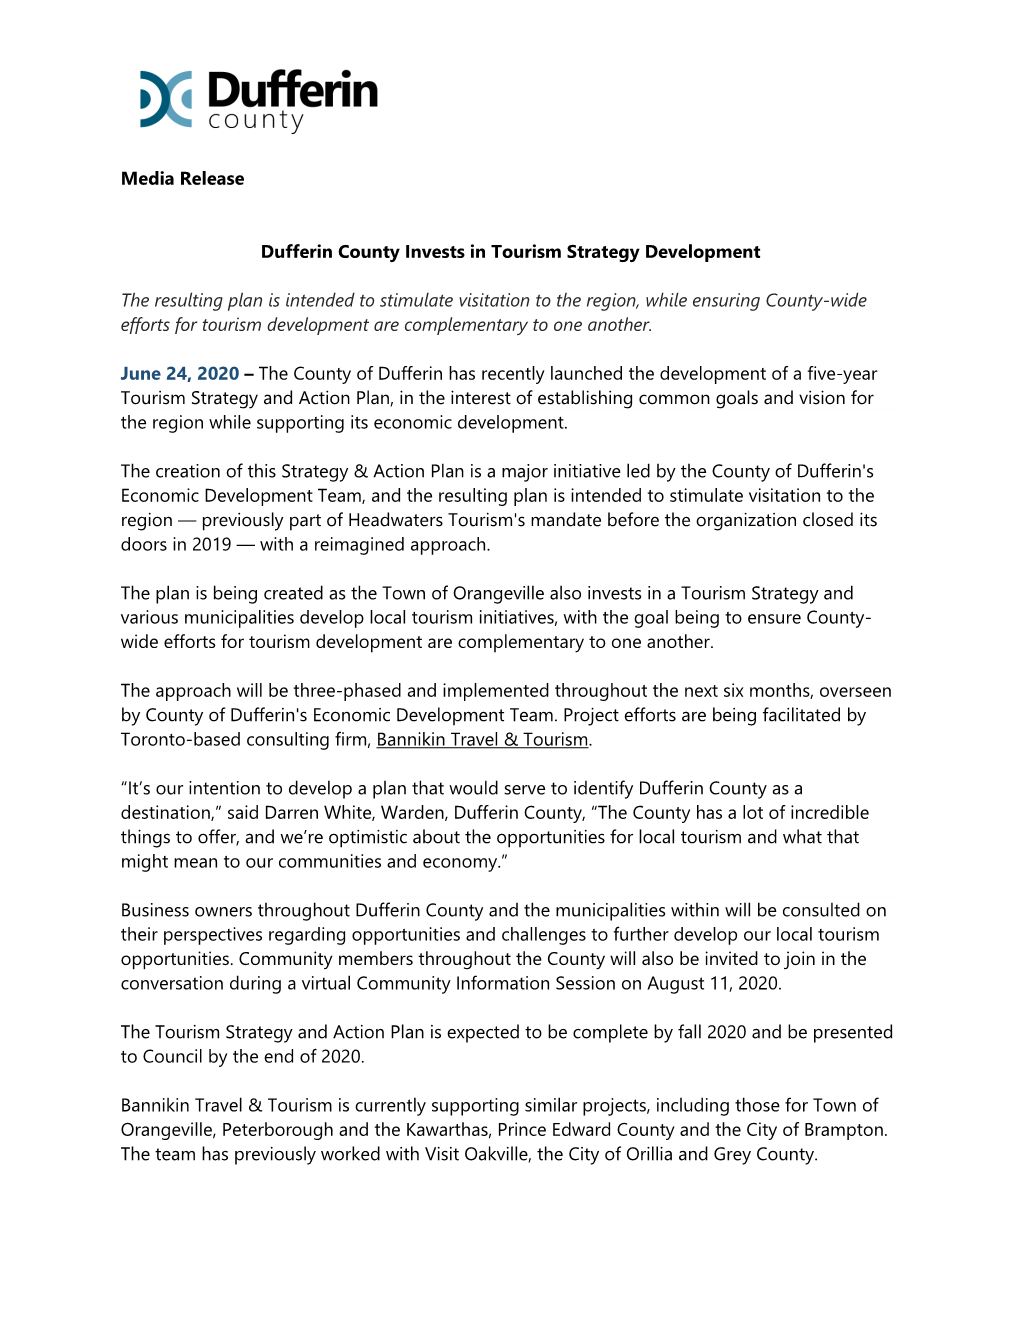 Media Release Dufferin County Invests in Tourism Strategy